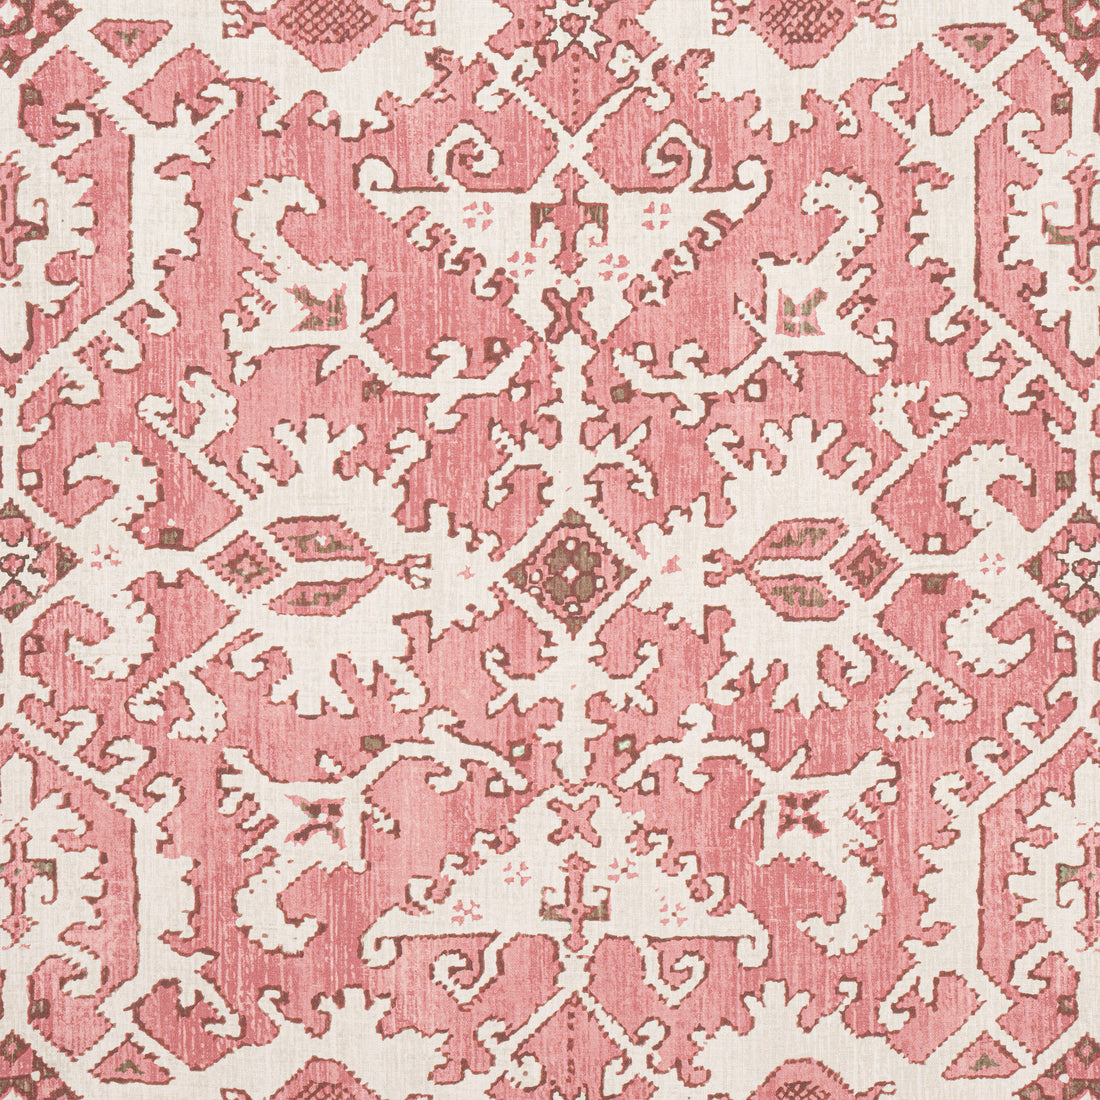 Pontorma fabric in Rose color - pattern number AF24559 - by Anna French in the Devon collection